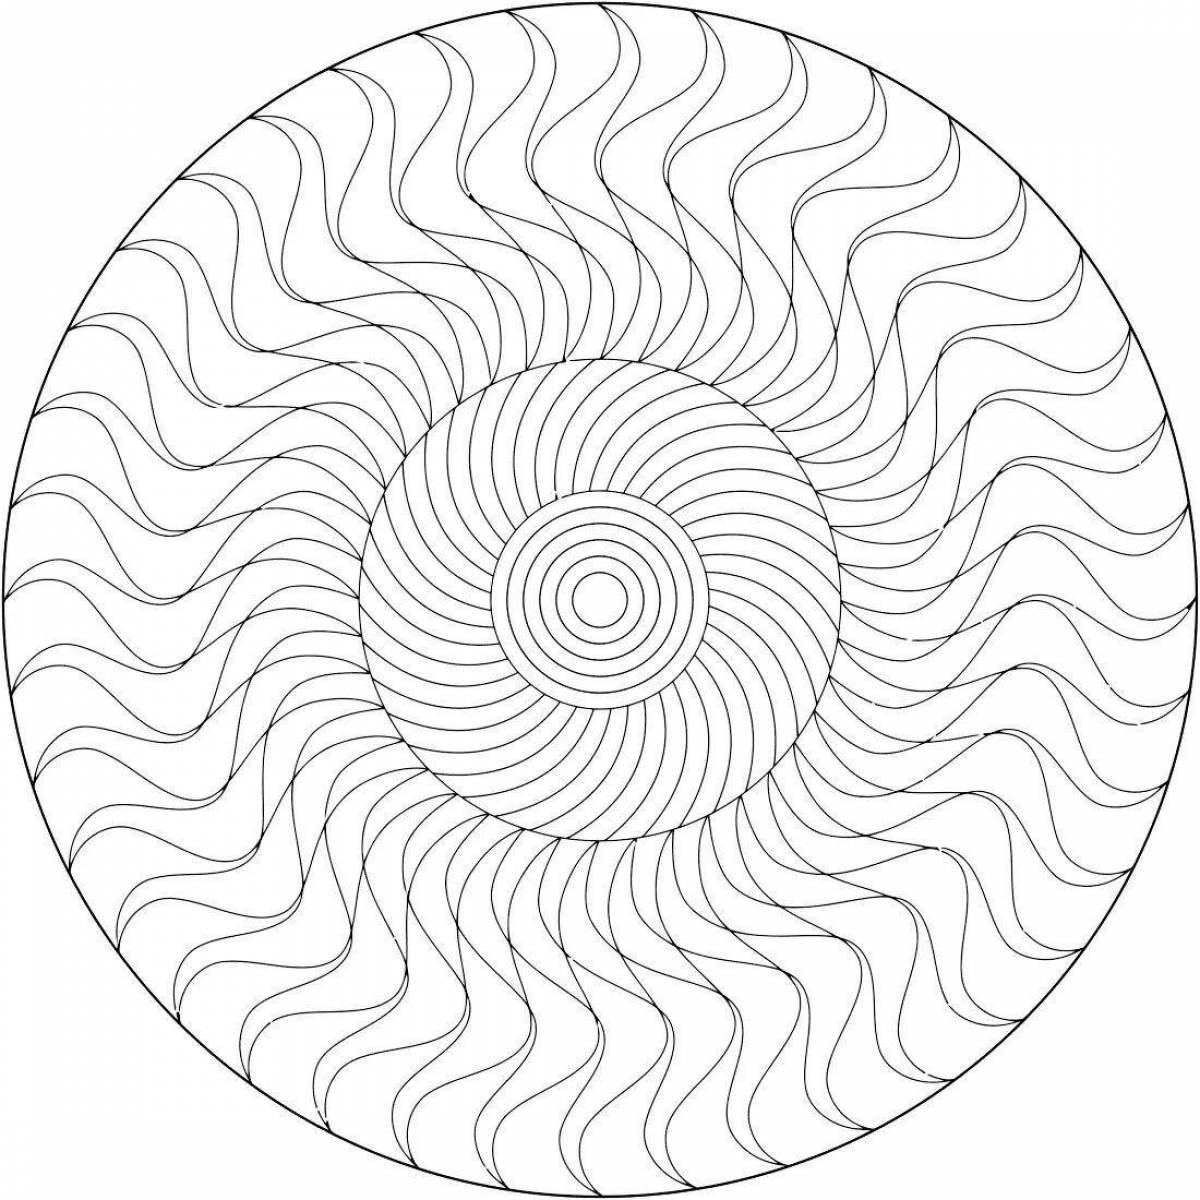 Colourful spiral coloring book for kids